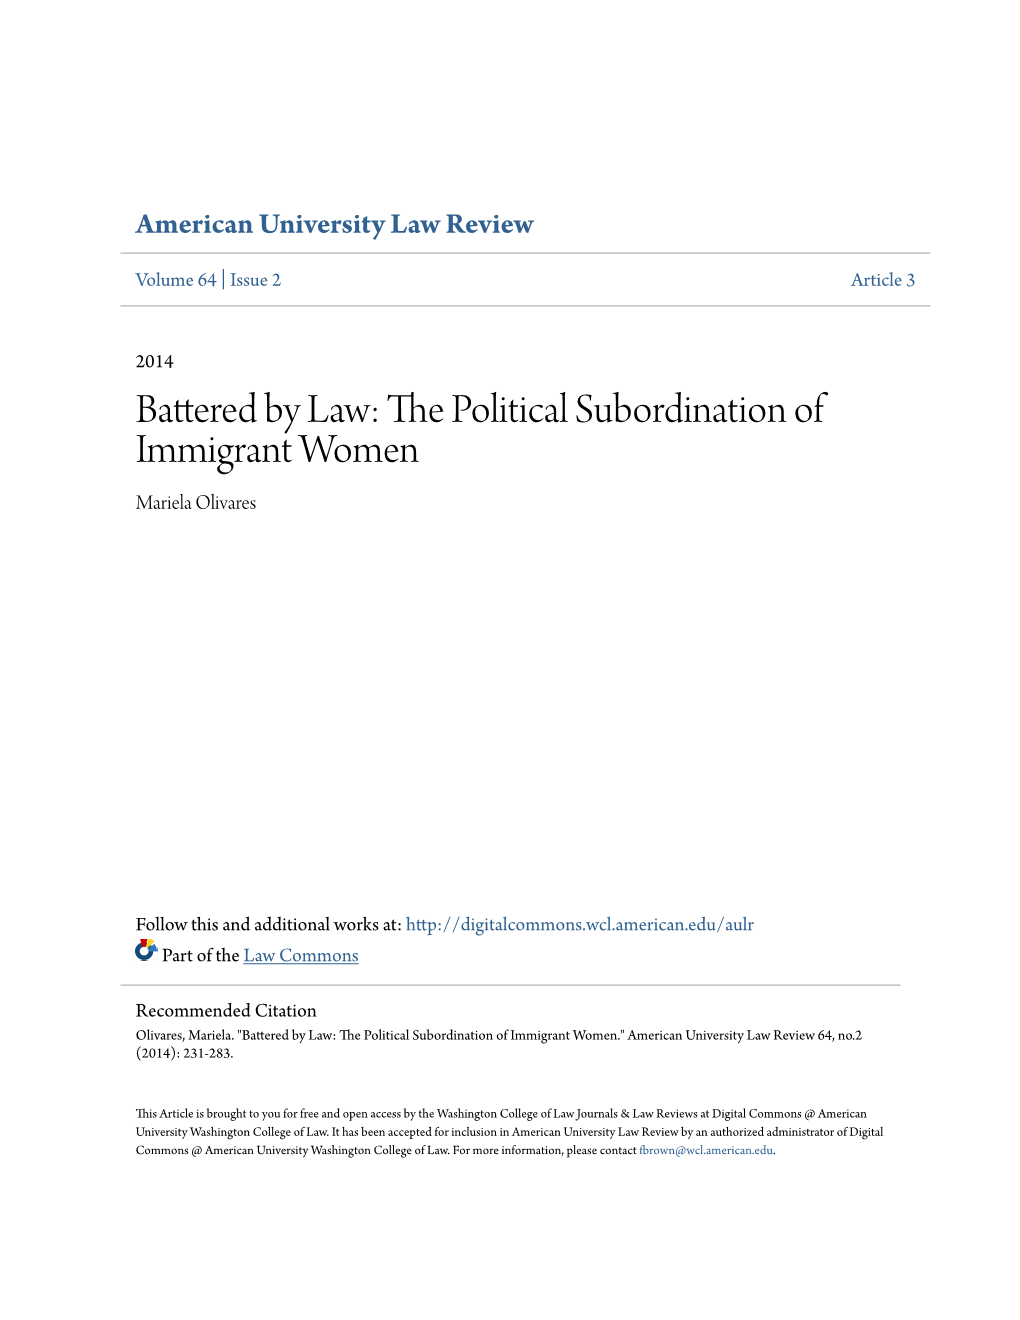 Battered by Law: the Political Subordination of Immigrant Women